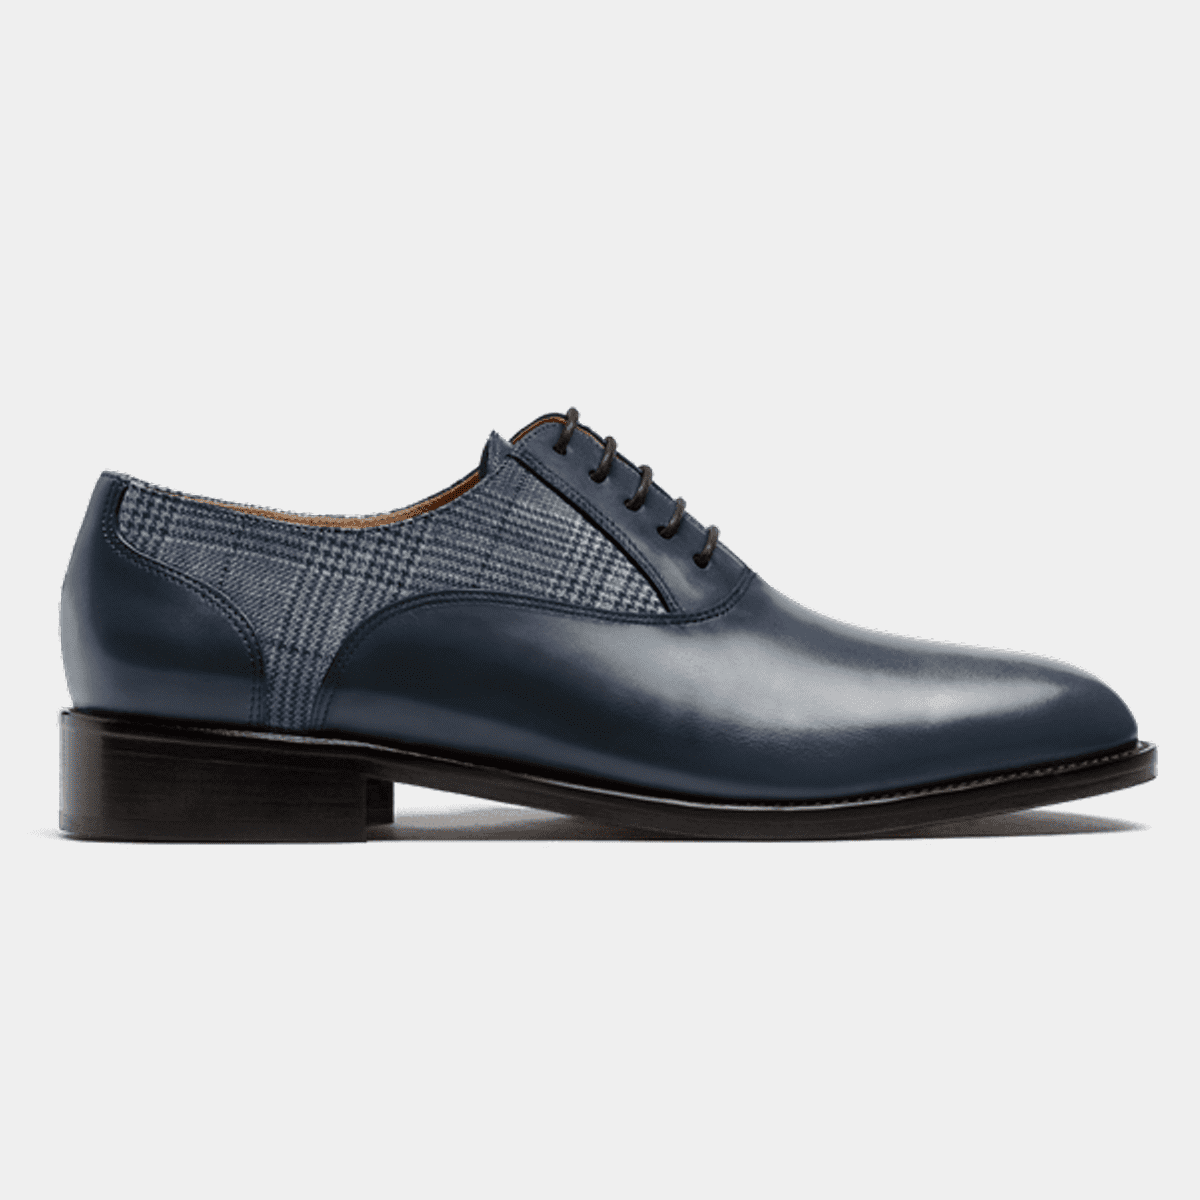 Oxford dress shoes - blue leather & tweed